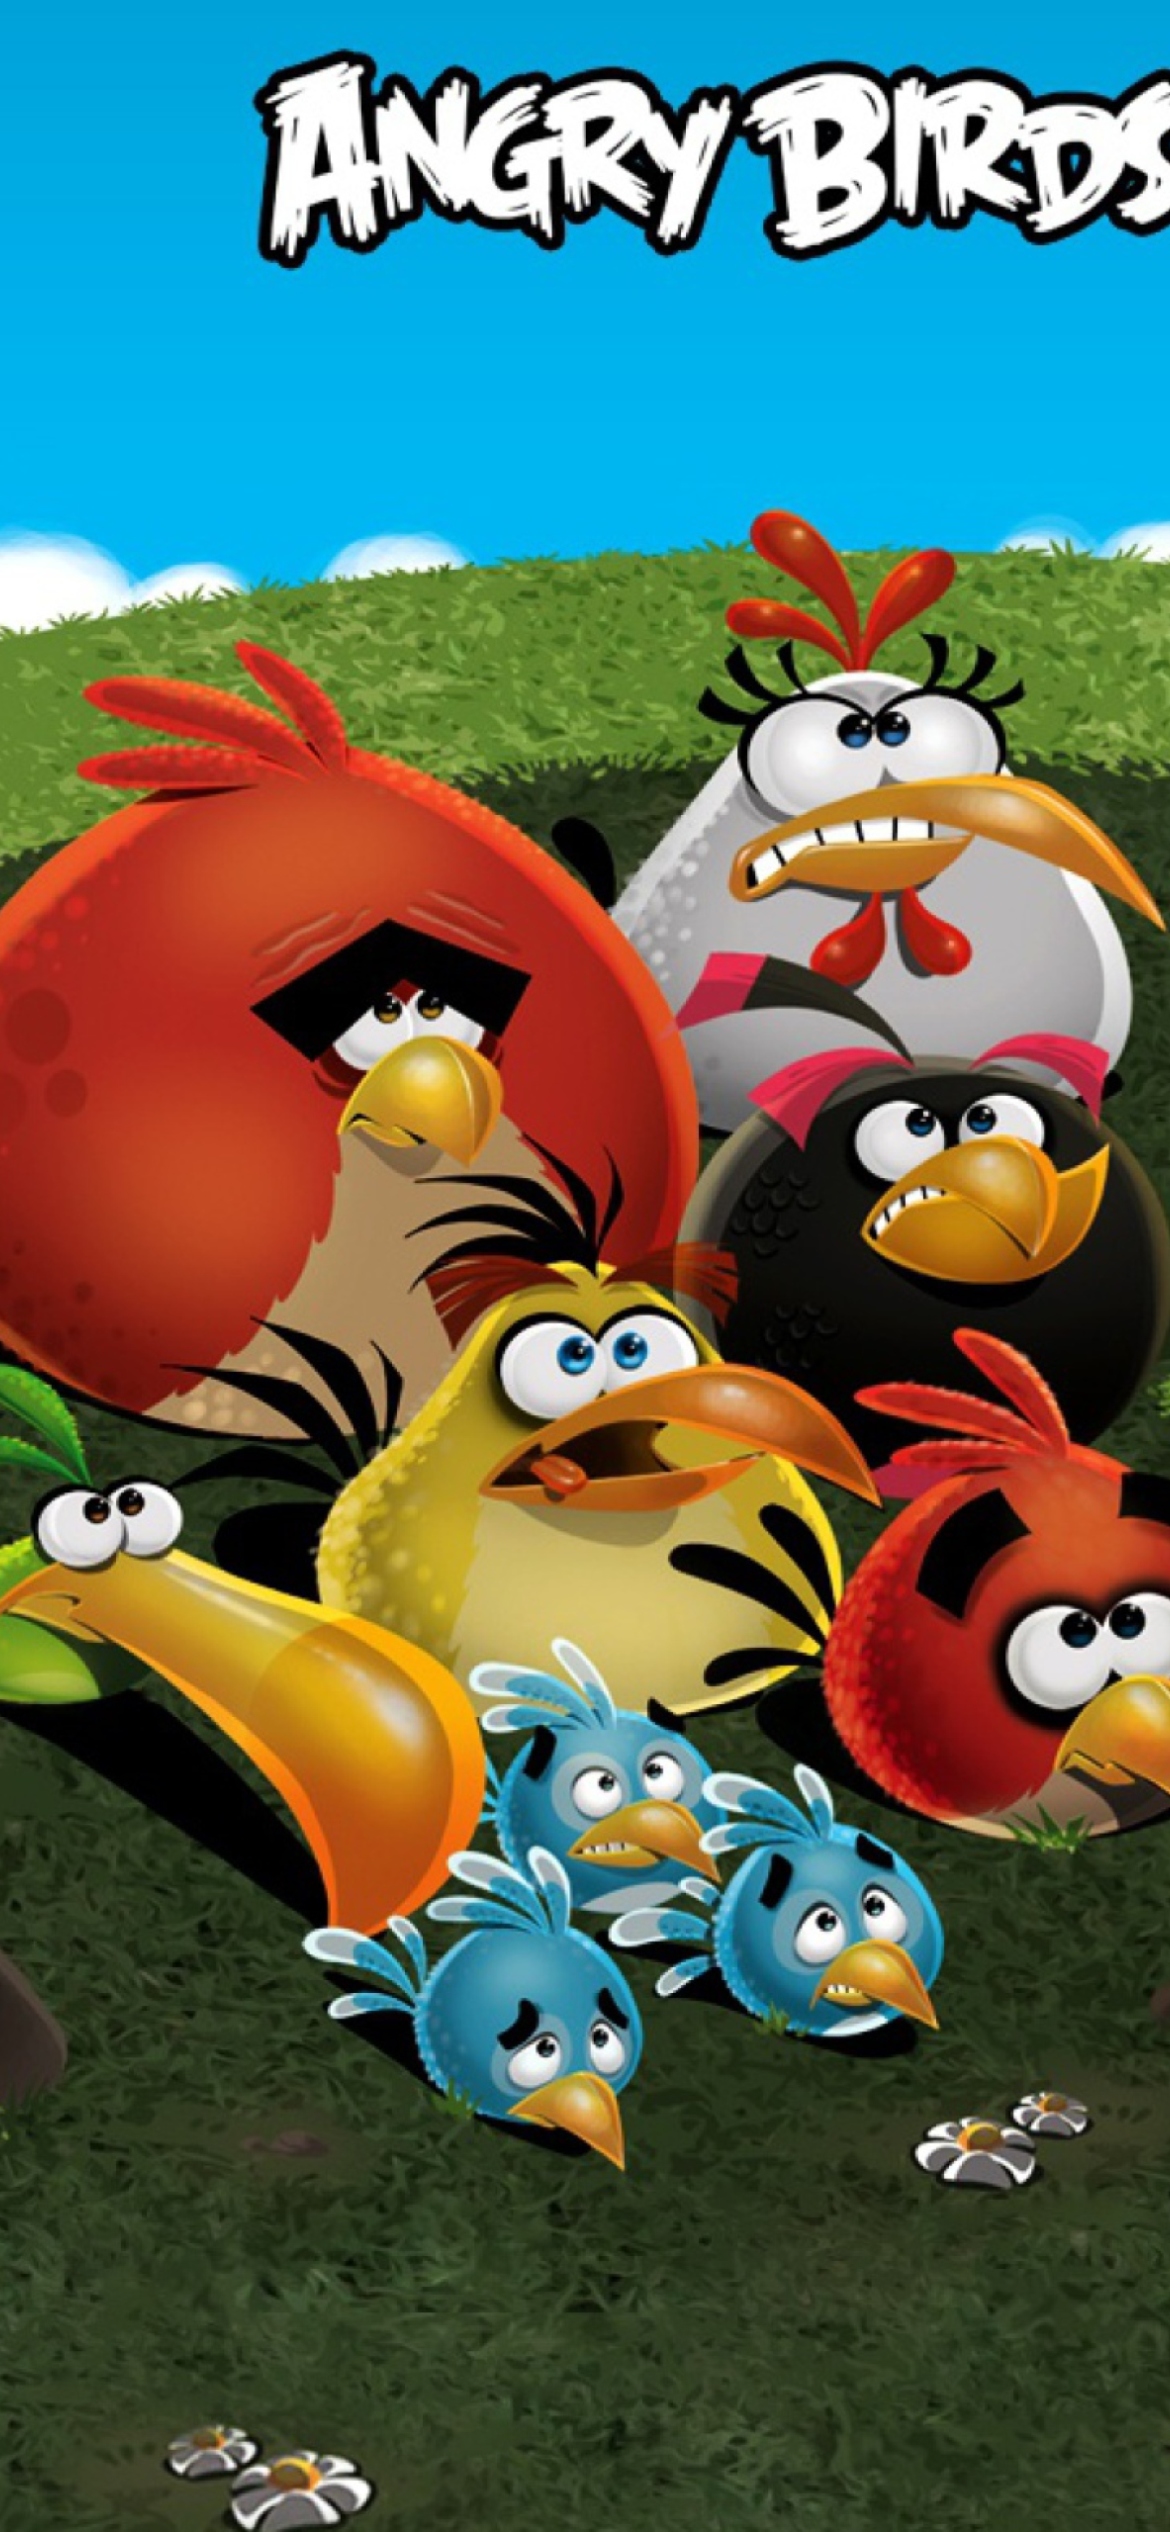 Angry Birds wallpaper 1170x2532